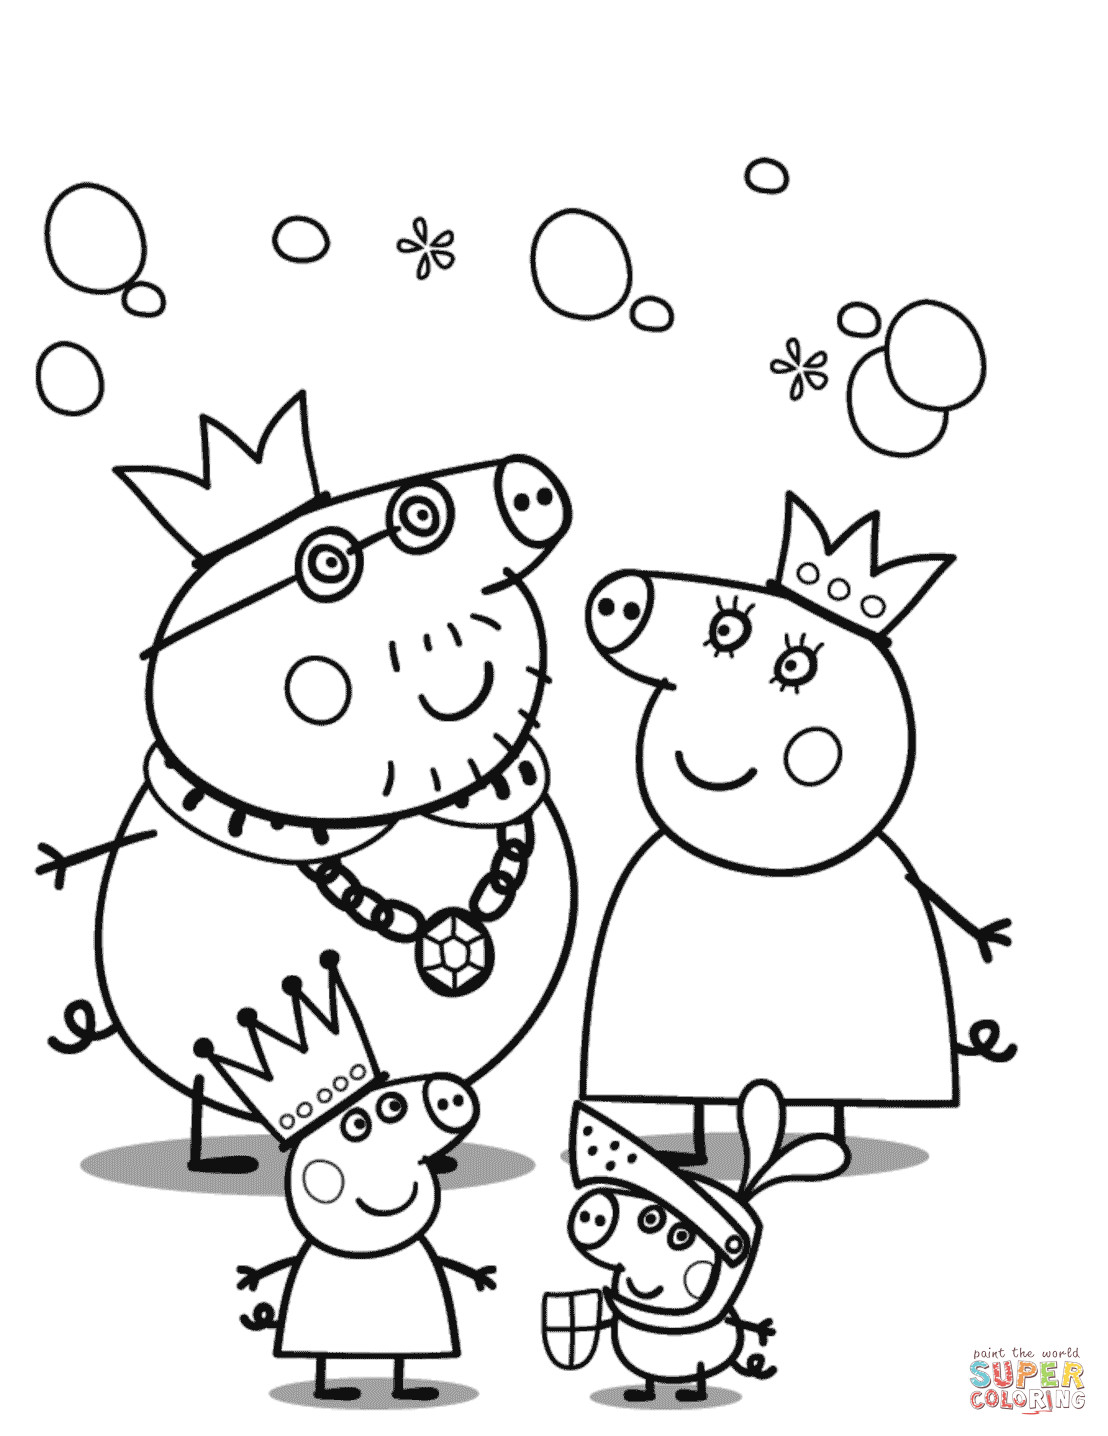 Peppa Pig Coloring Pages
 Peppa Pig s Royal Family coloring page